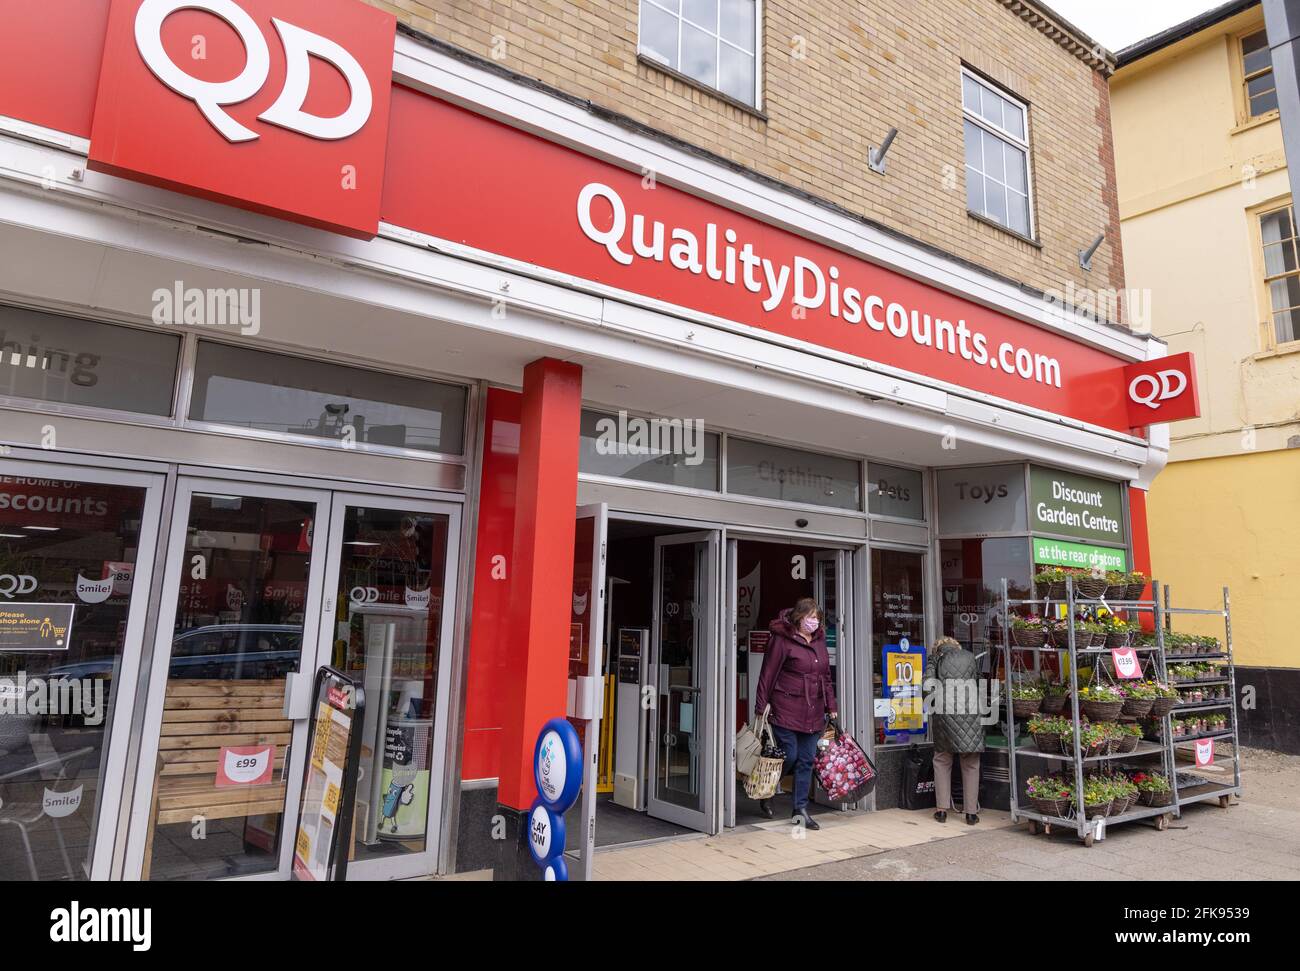 QD stores, or Quality Discounts store, exterior, High Street, Newmarket town centre, Suffolk UK Stock Photo